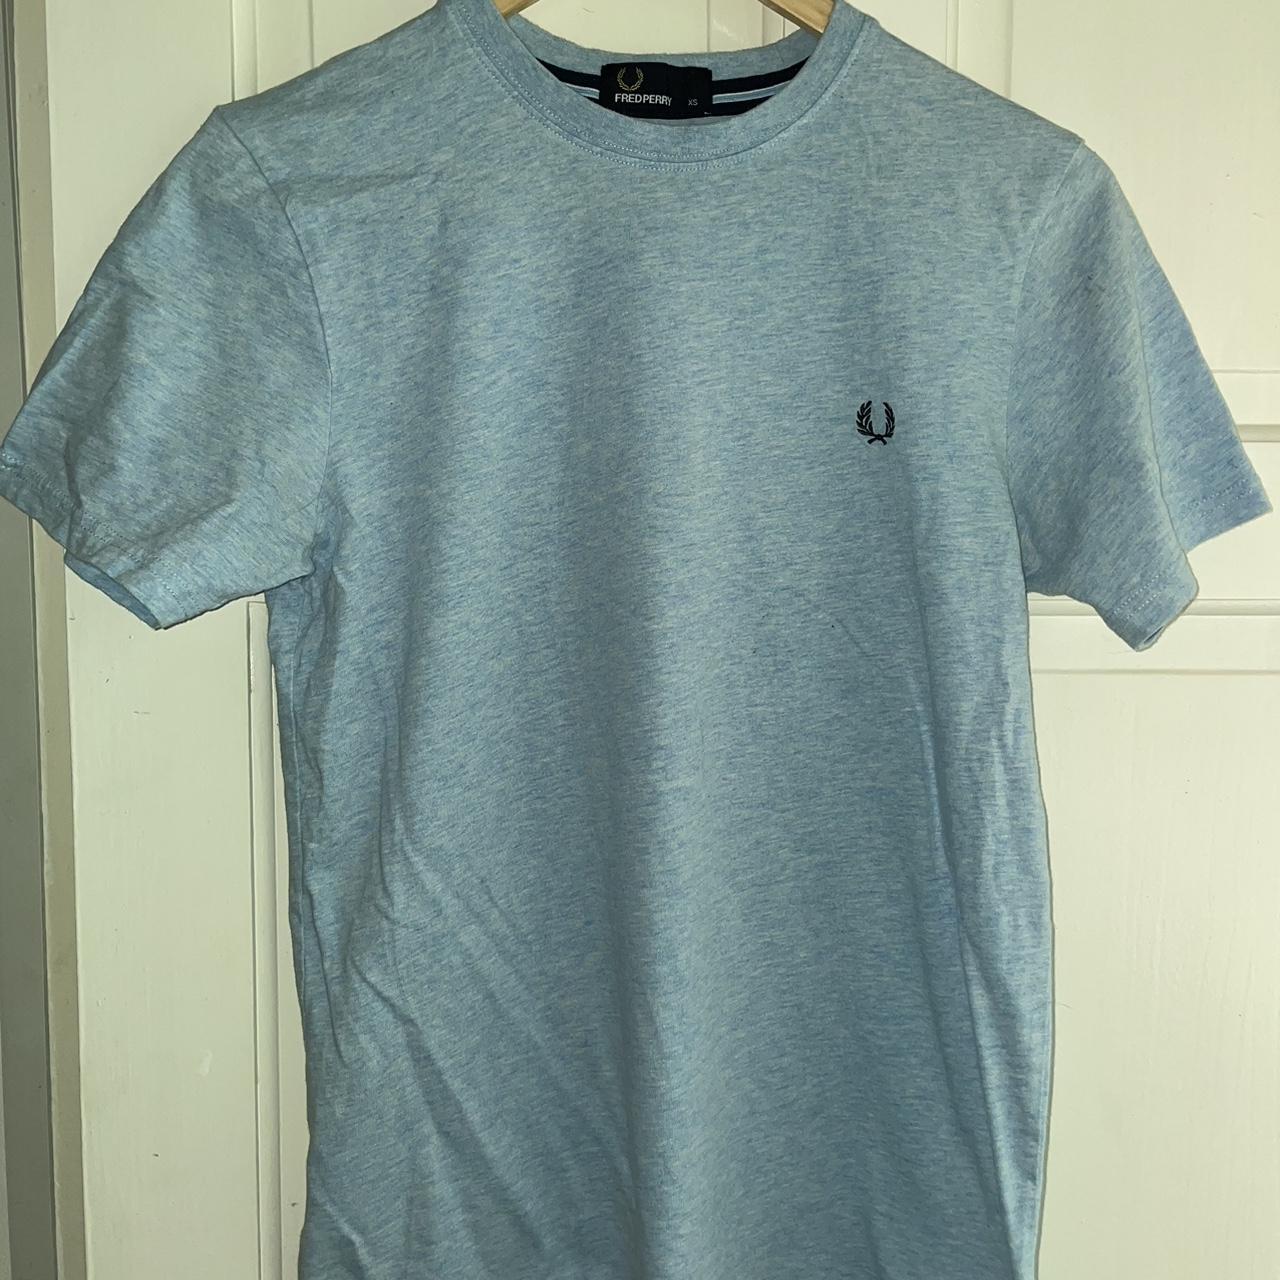 Blue Fred Perry t-shirt #fredperry #blue #t-shirt - Depop